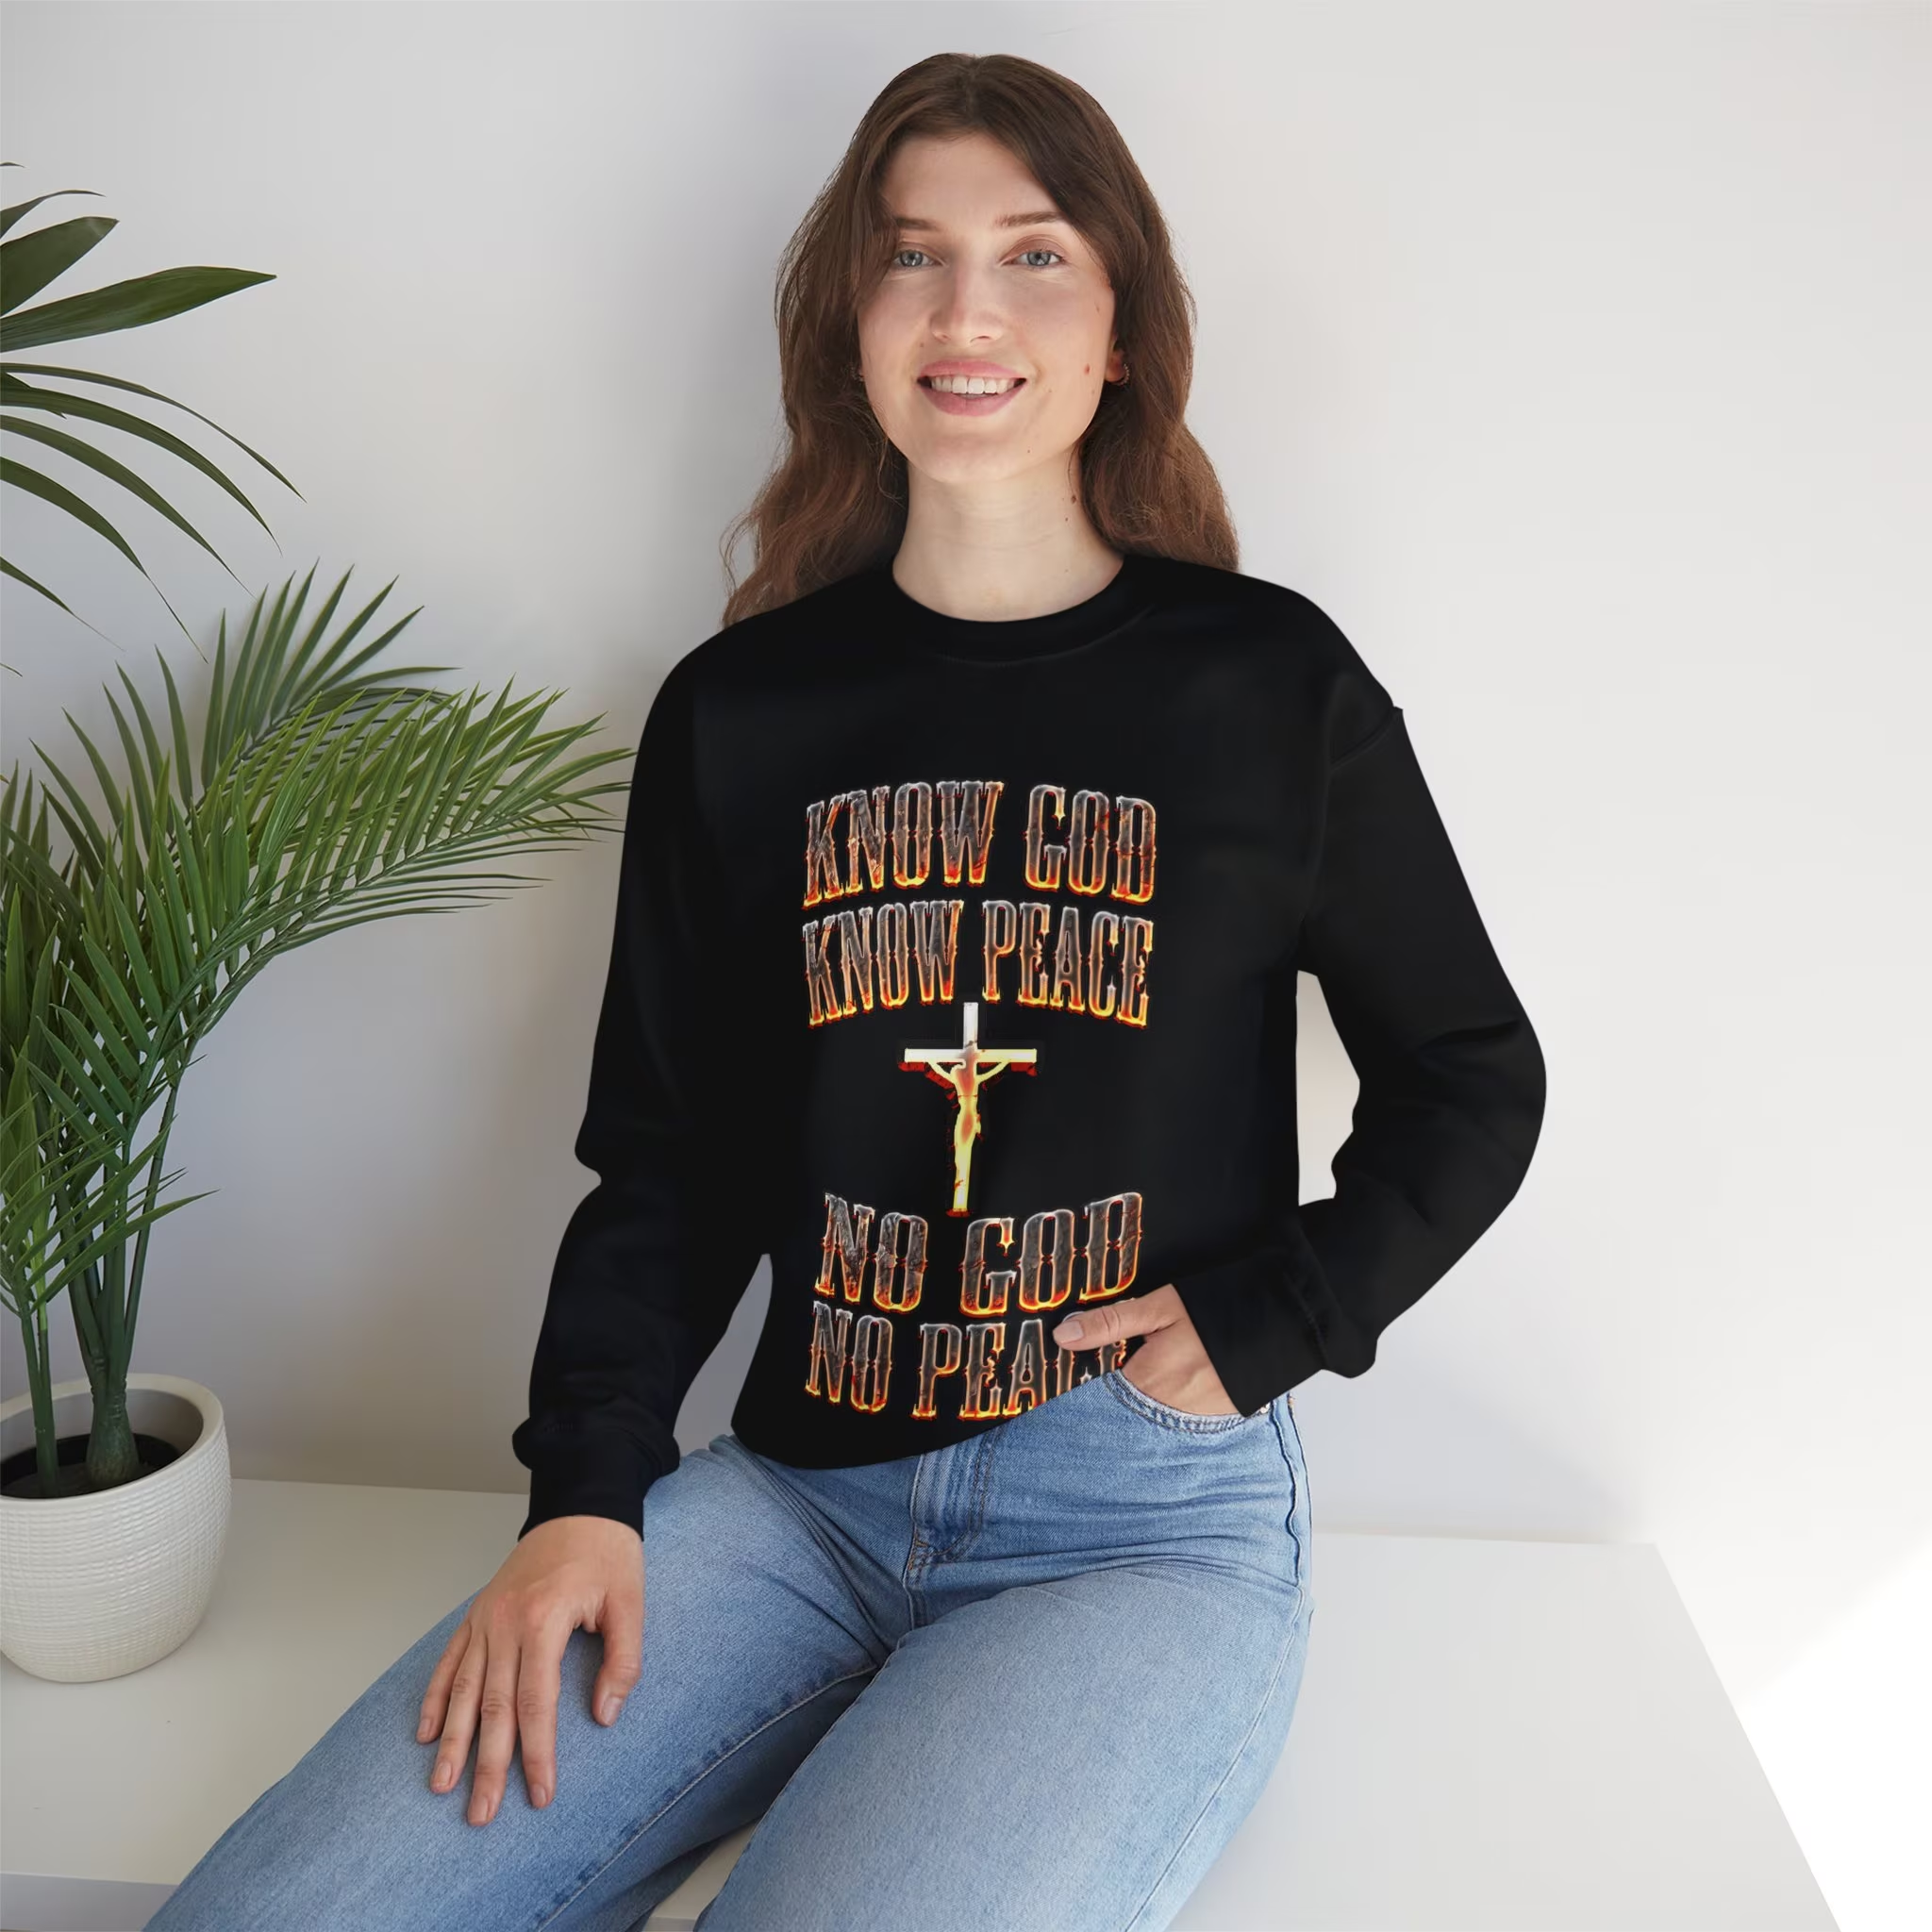 Elegant religious themed long-sleeve sweatshirt with inspirational quote.  Perfect gift for the Christian faithful this Easter season.